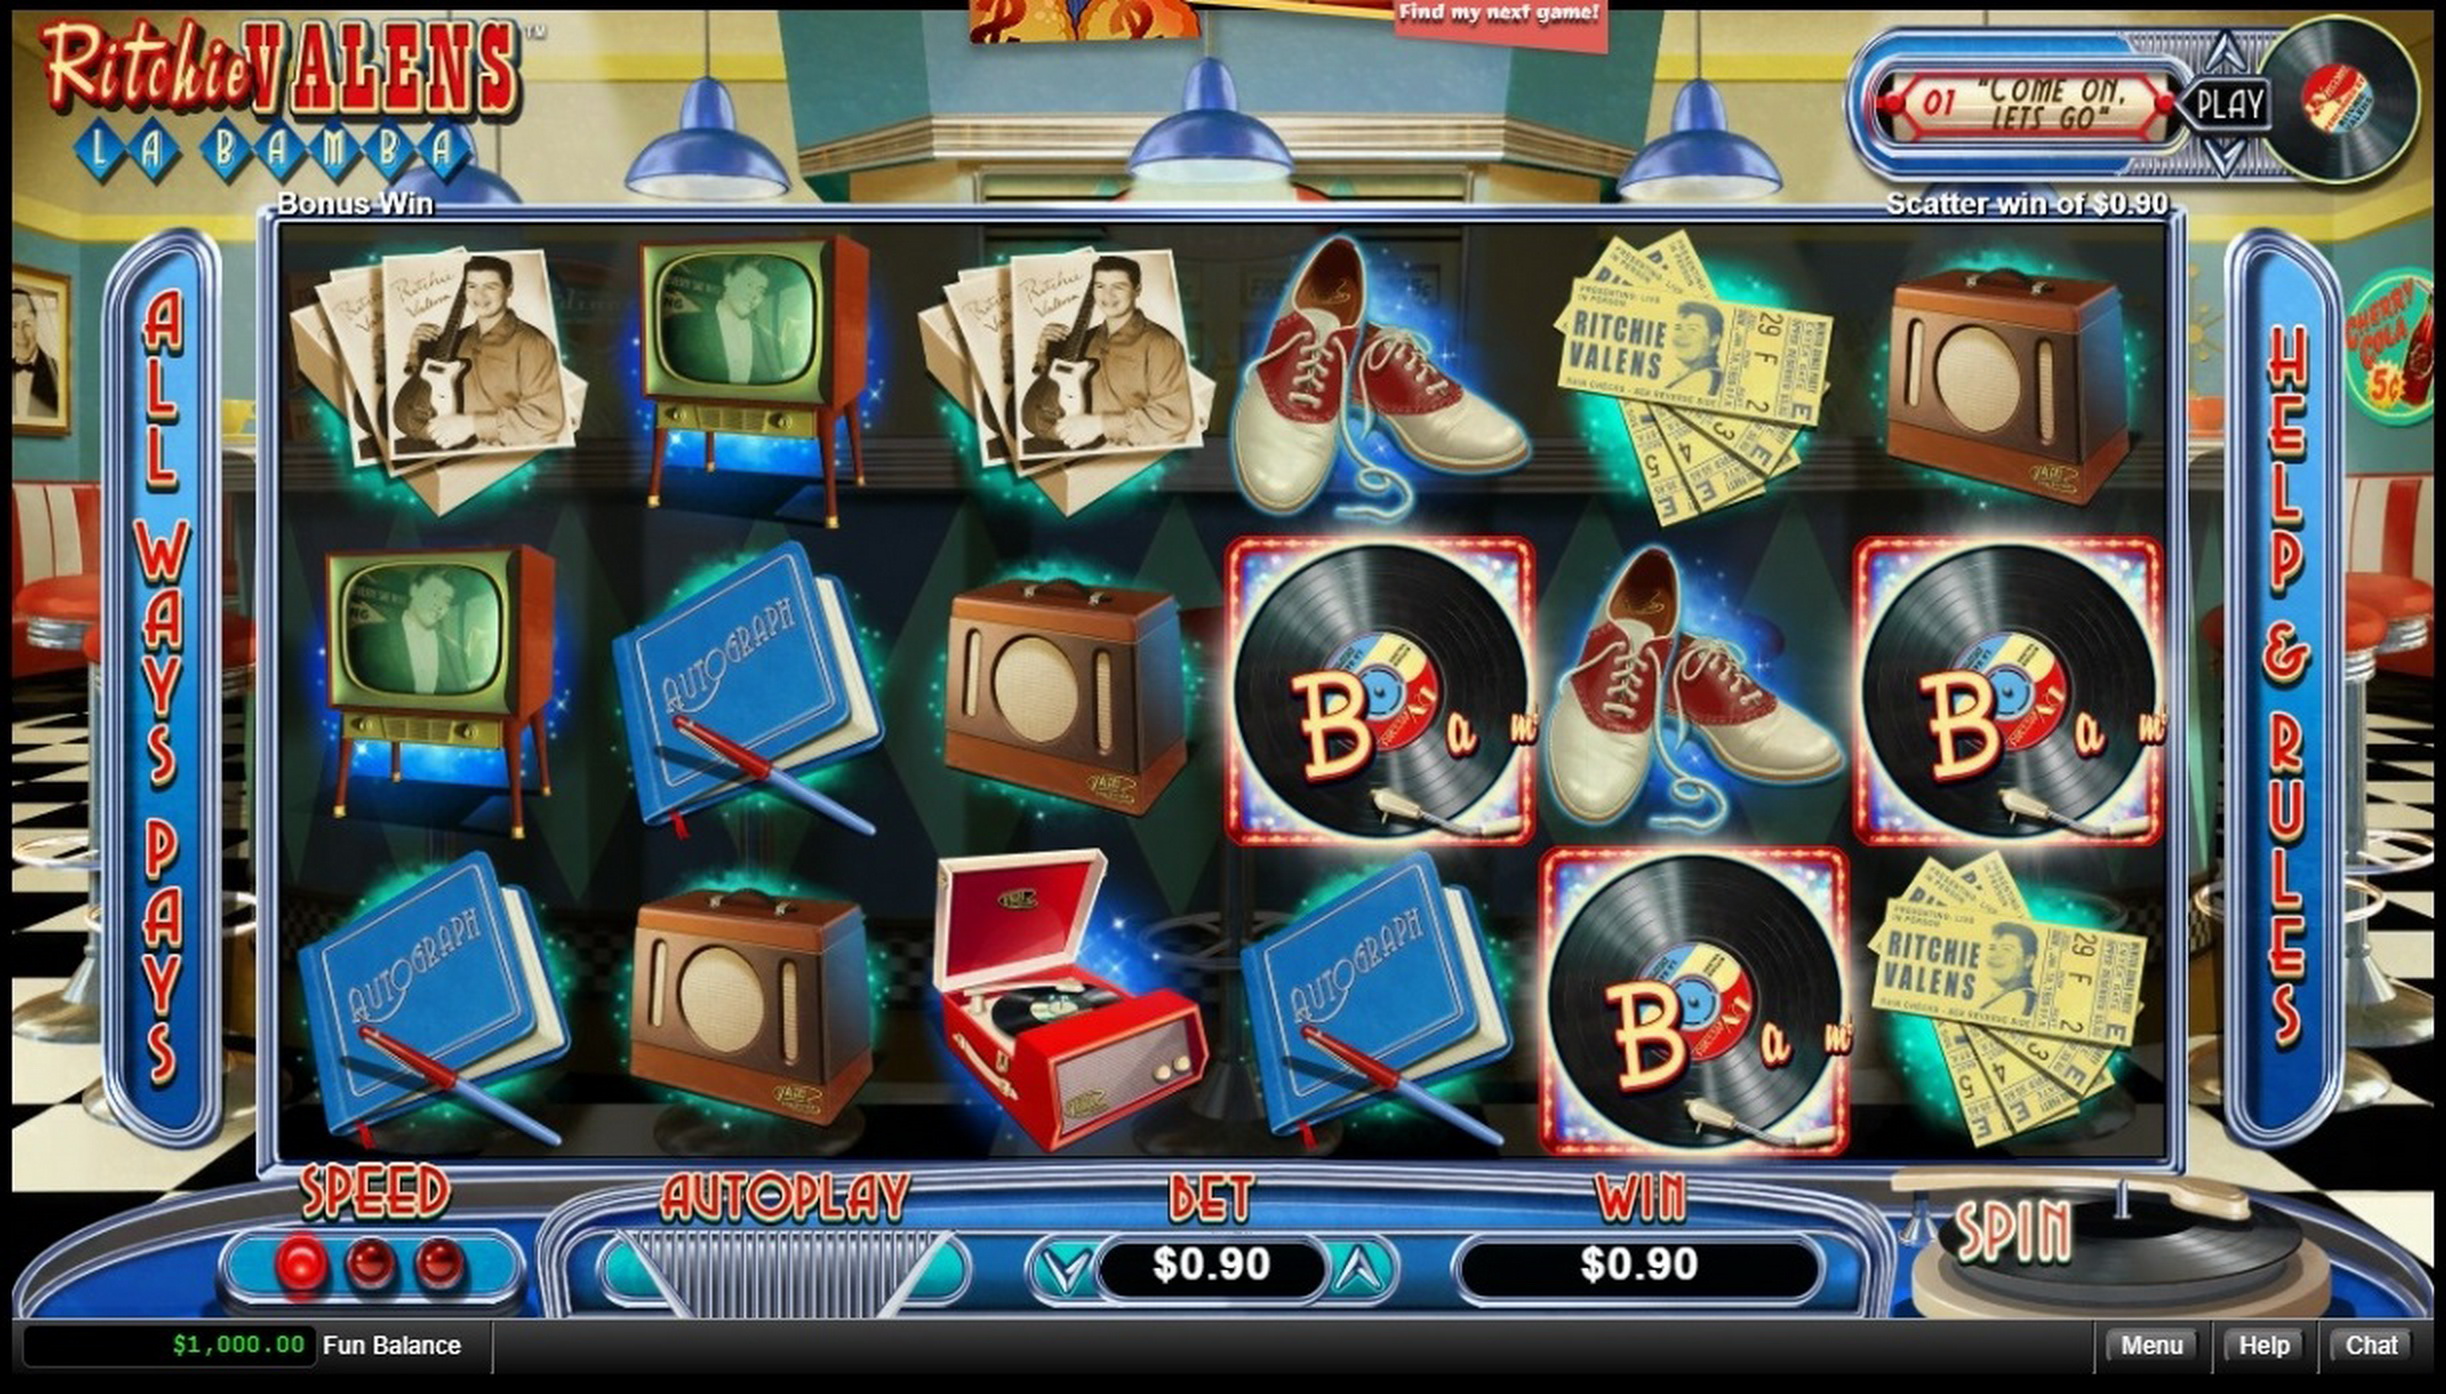 Win Money in Ritchie Valens LA Bamba Free Slot Game by Real Time Gaming